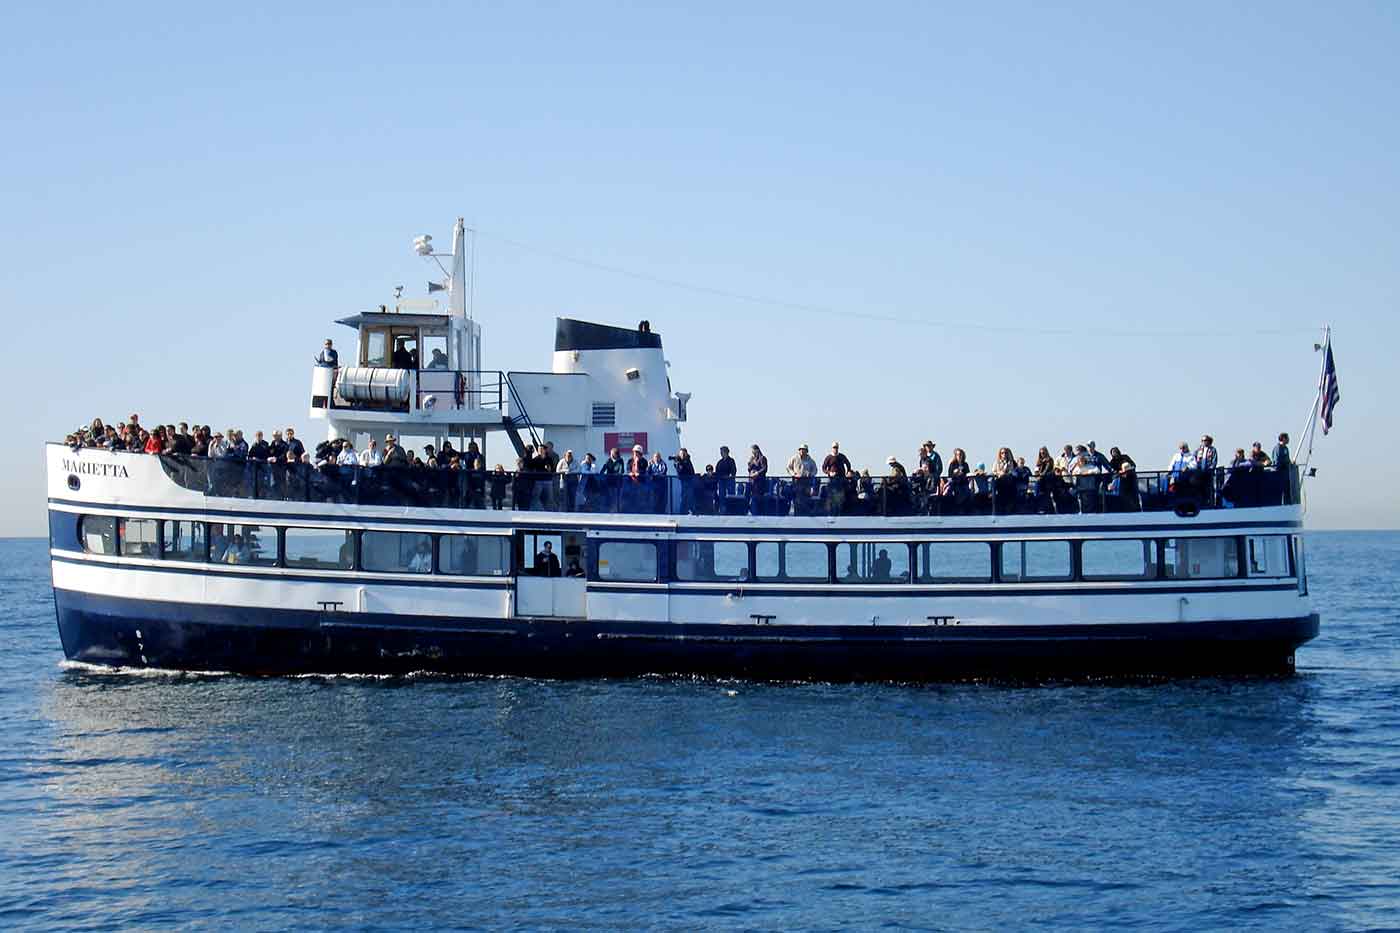 Boat Cruise / Whale Watching Cruise